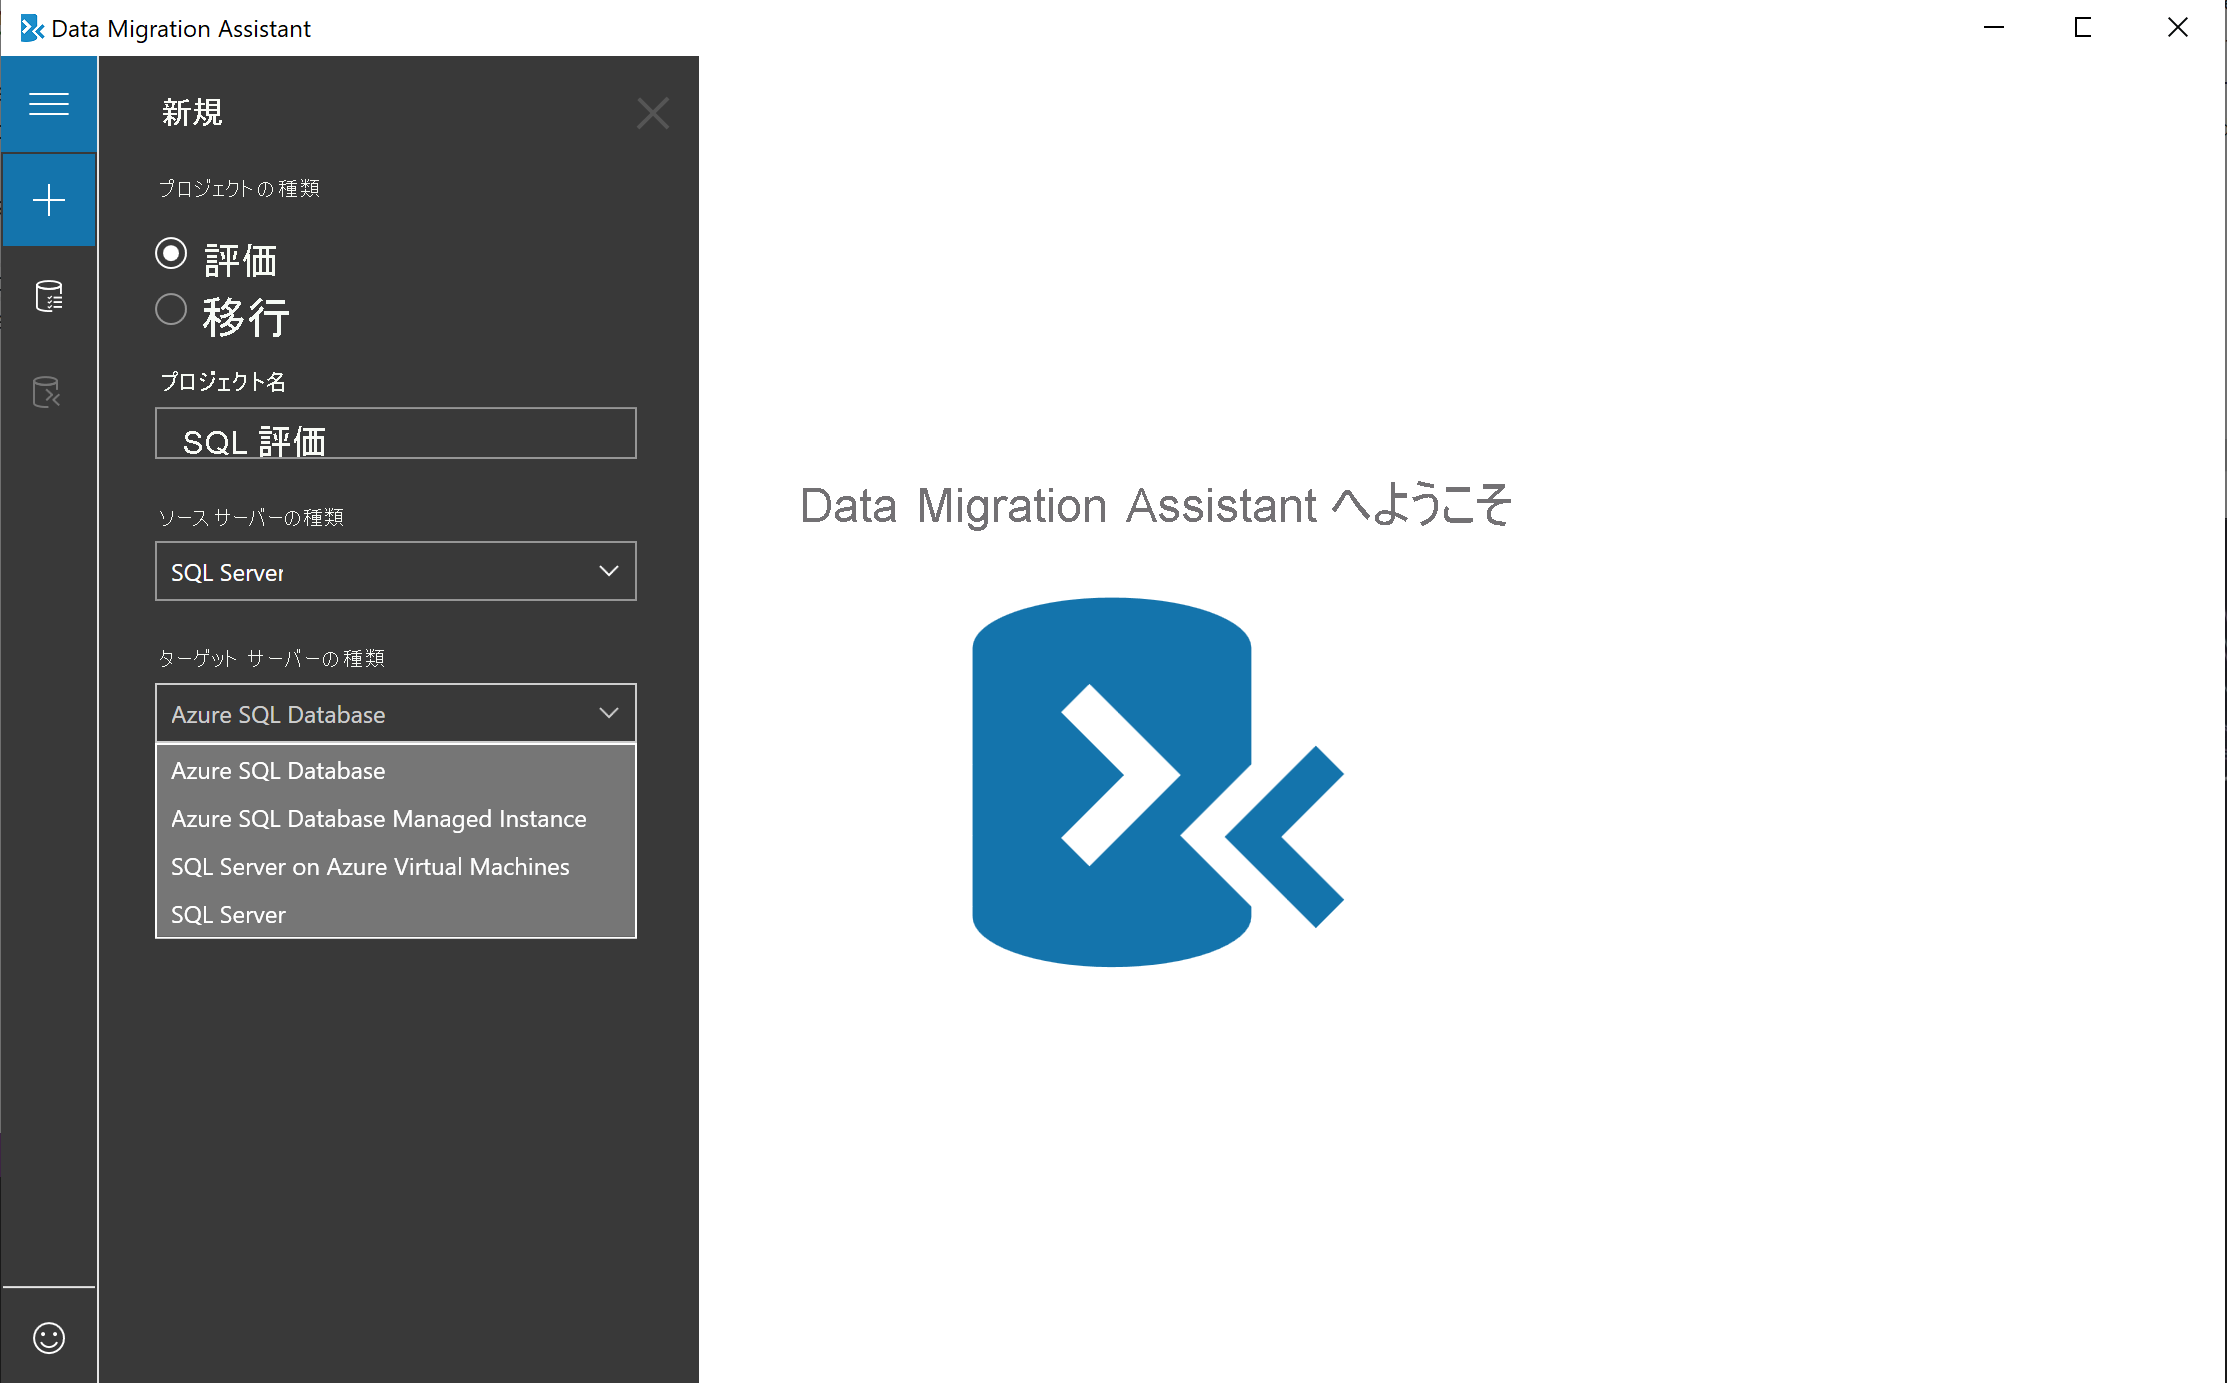 Perfoming assessments in the Data Migration Assistant